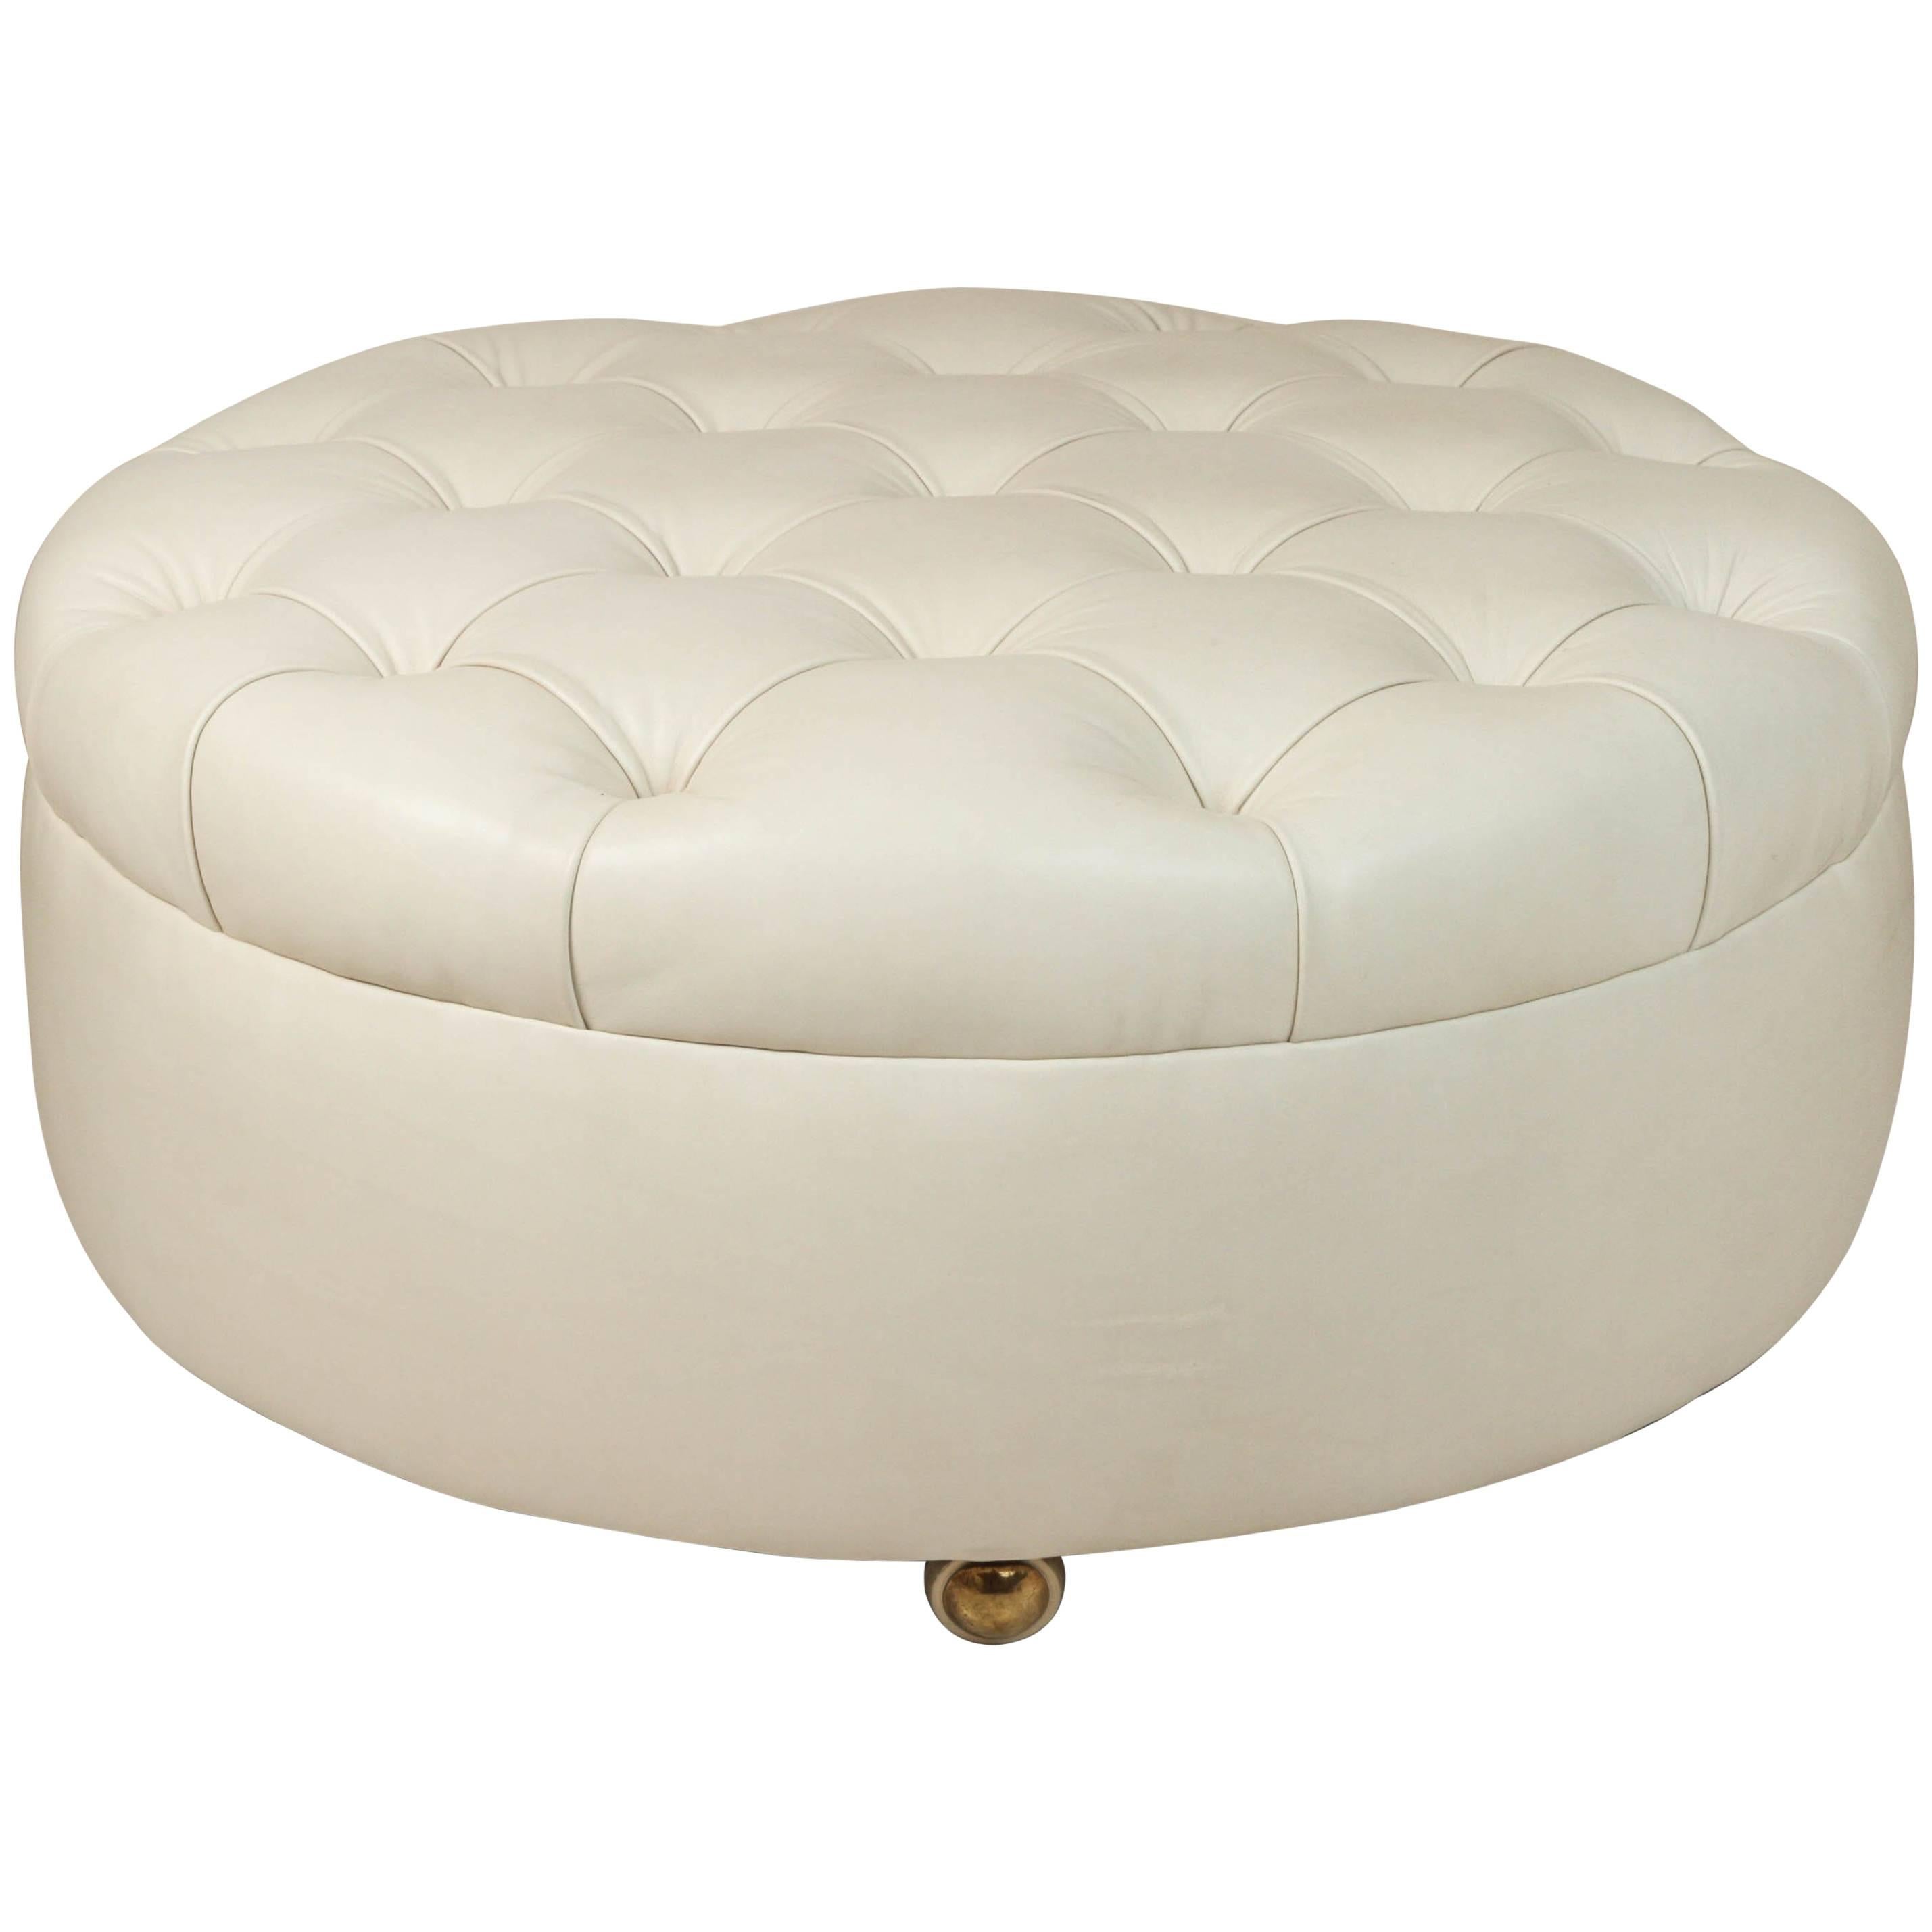 Leather Tufted French, 1960s Ottoman For Sale